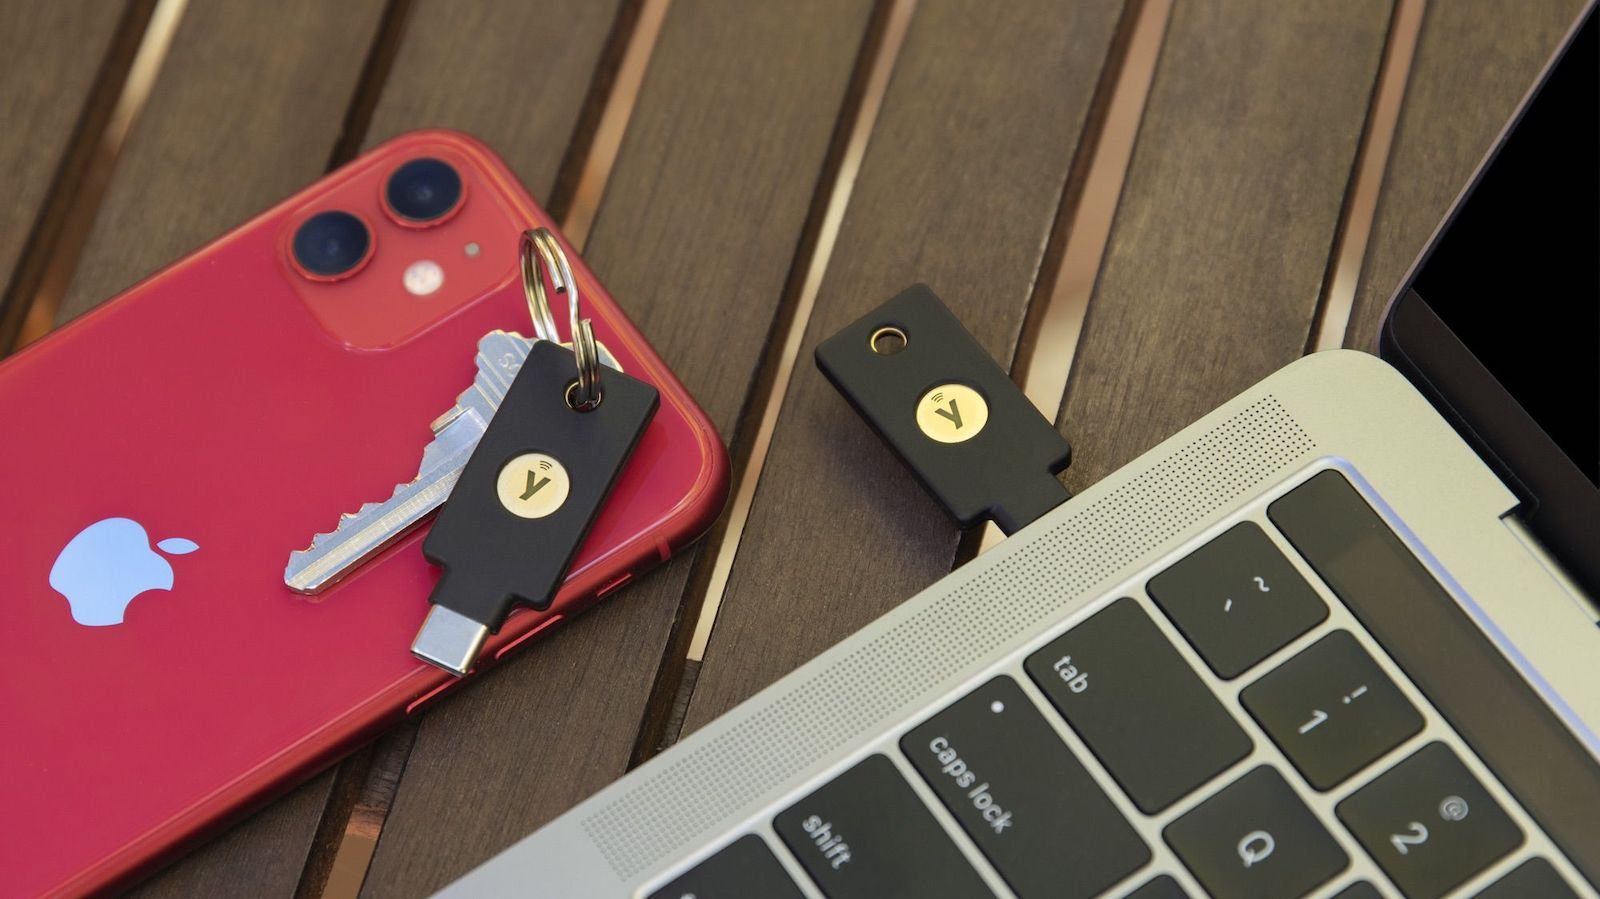 Yubico YubiKey 5C NFC multiprotocol security key protects against account takeovers